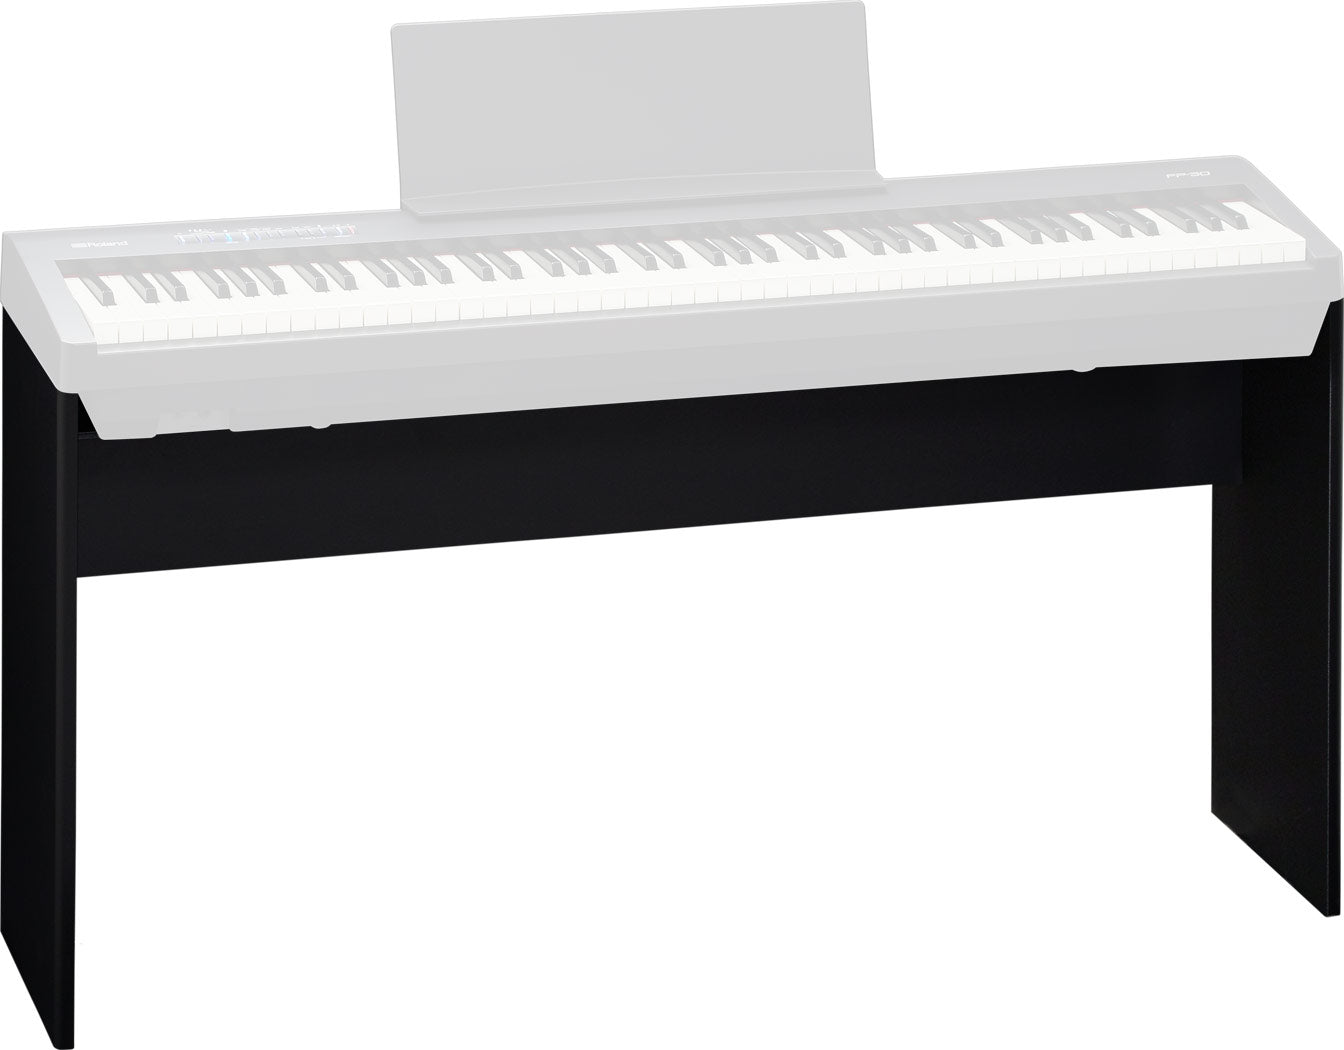 Roland - KSC - 70 | Custom Keyboard stand for the Roland FP-30